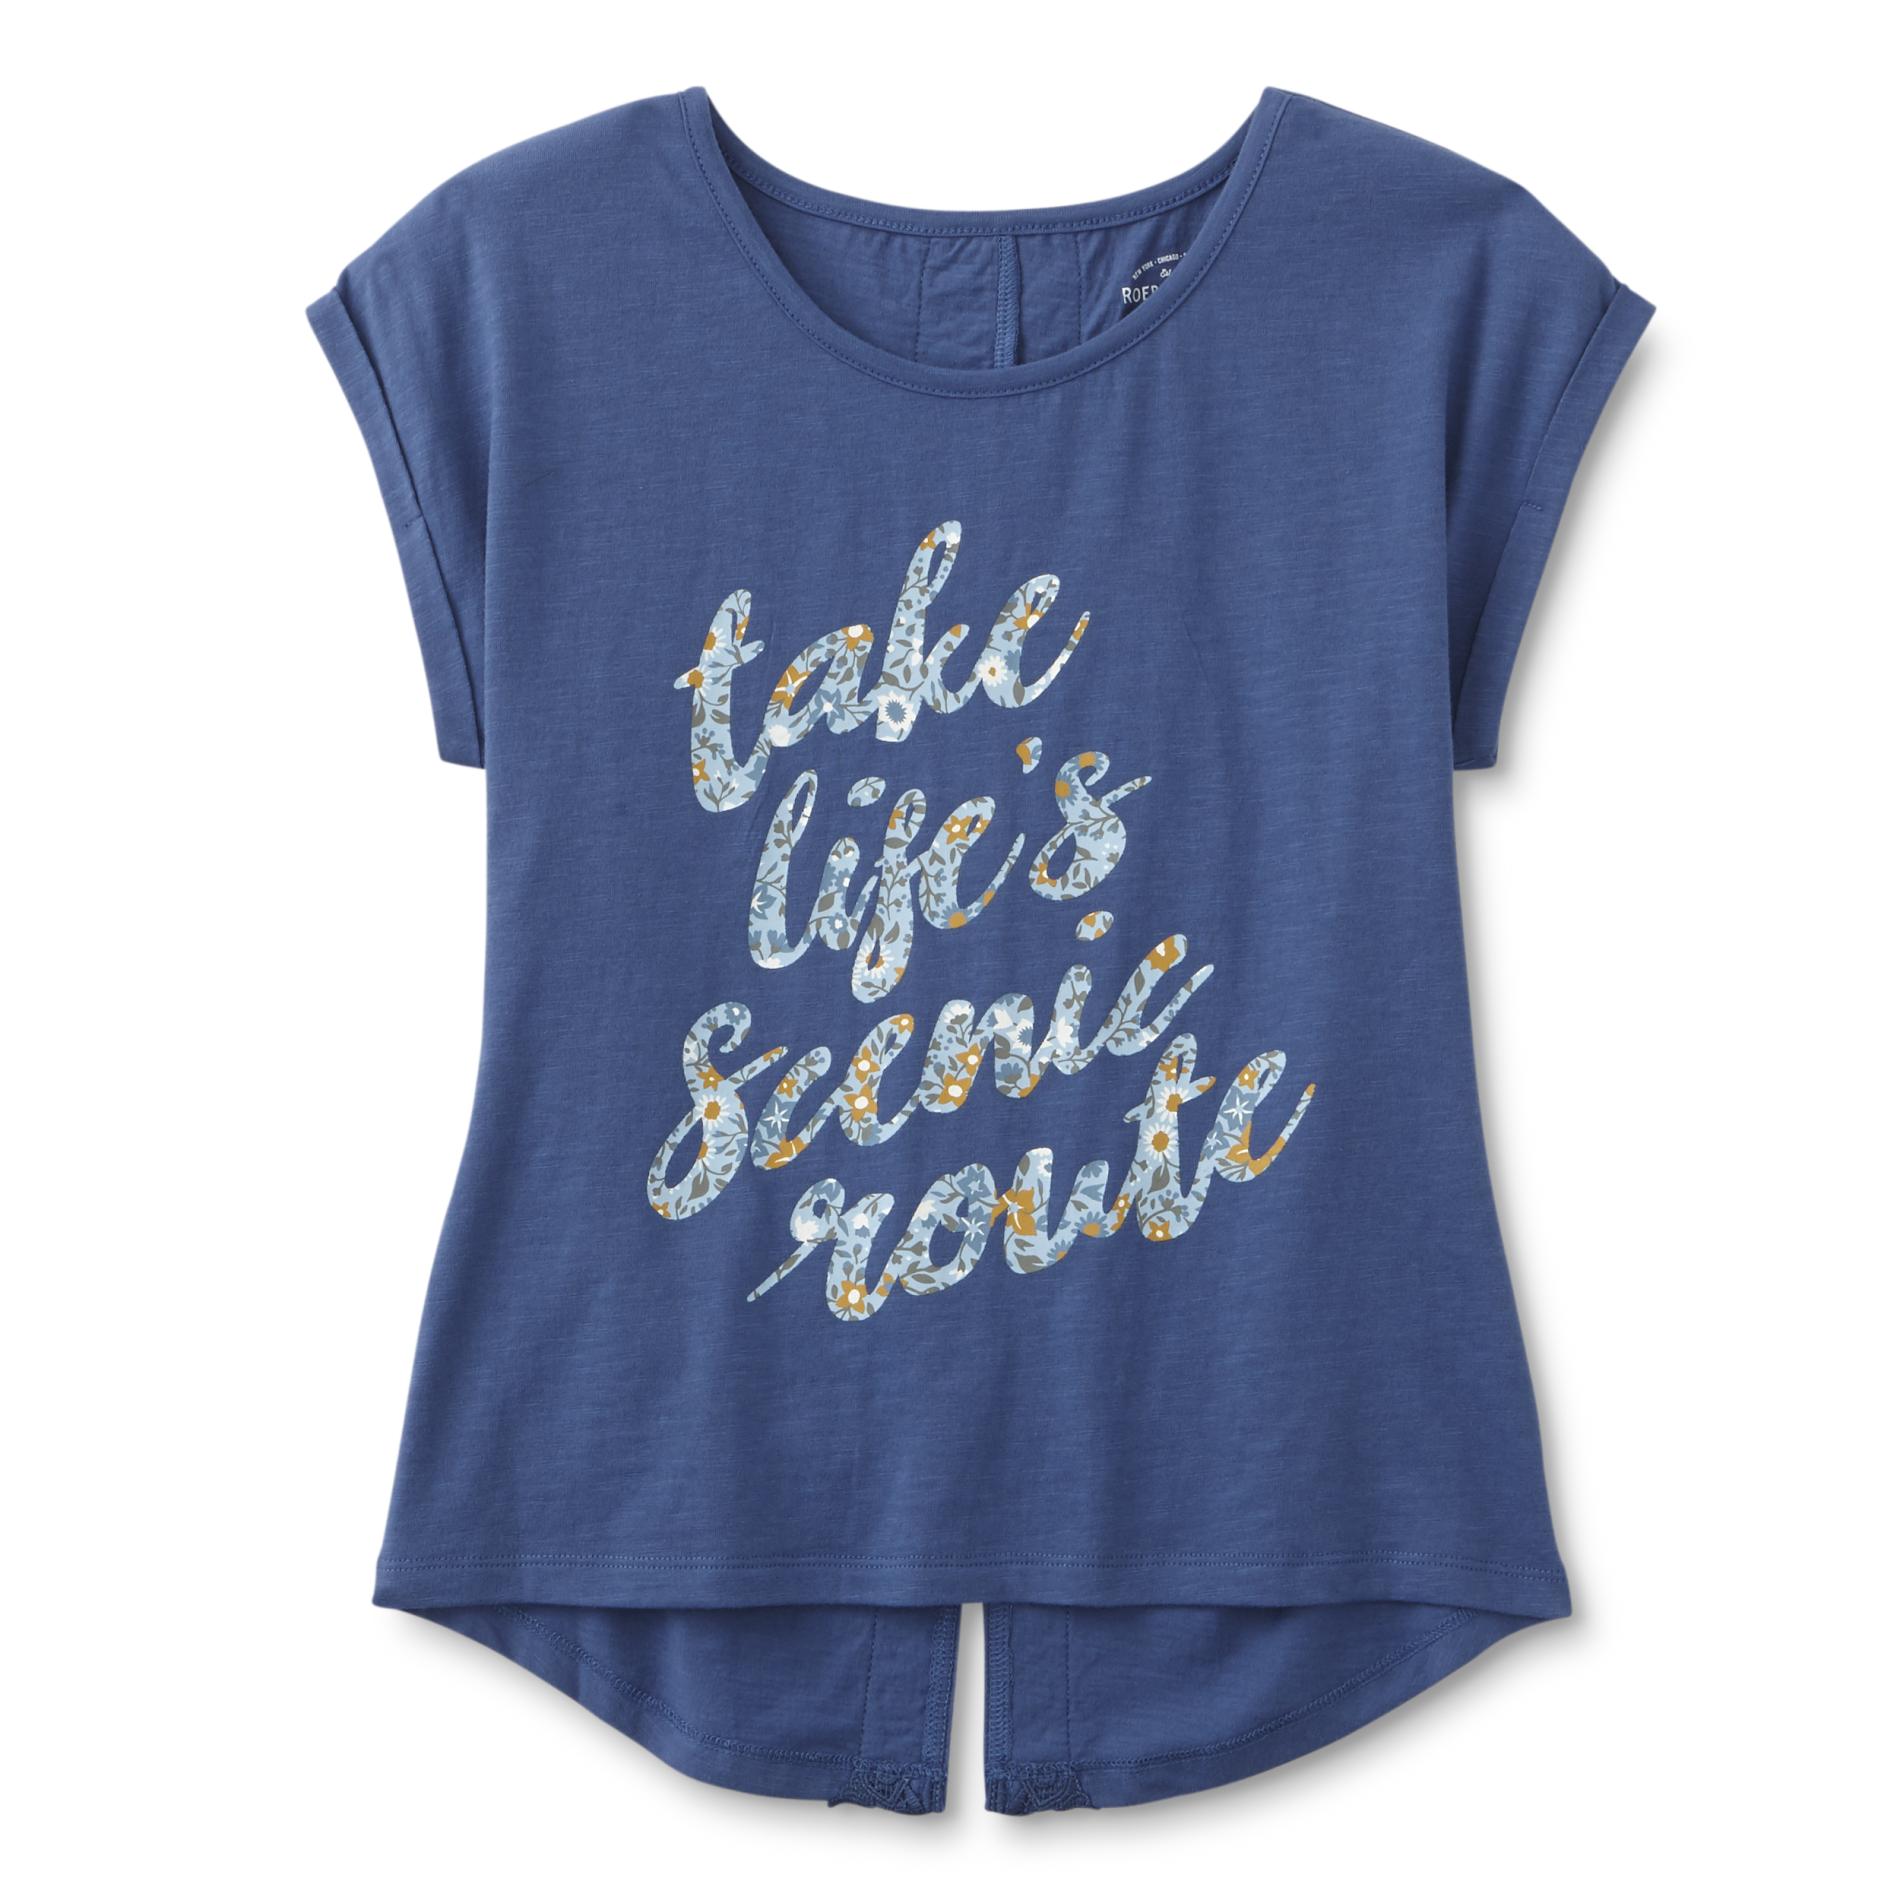 ROEBUCK & CO R1893 Girl's Graphic T-Shirt - Take Life's Scenic Route